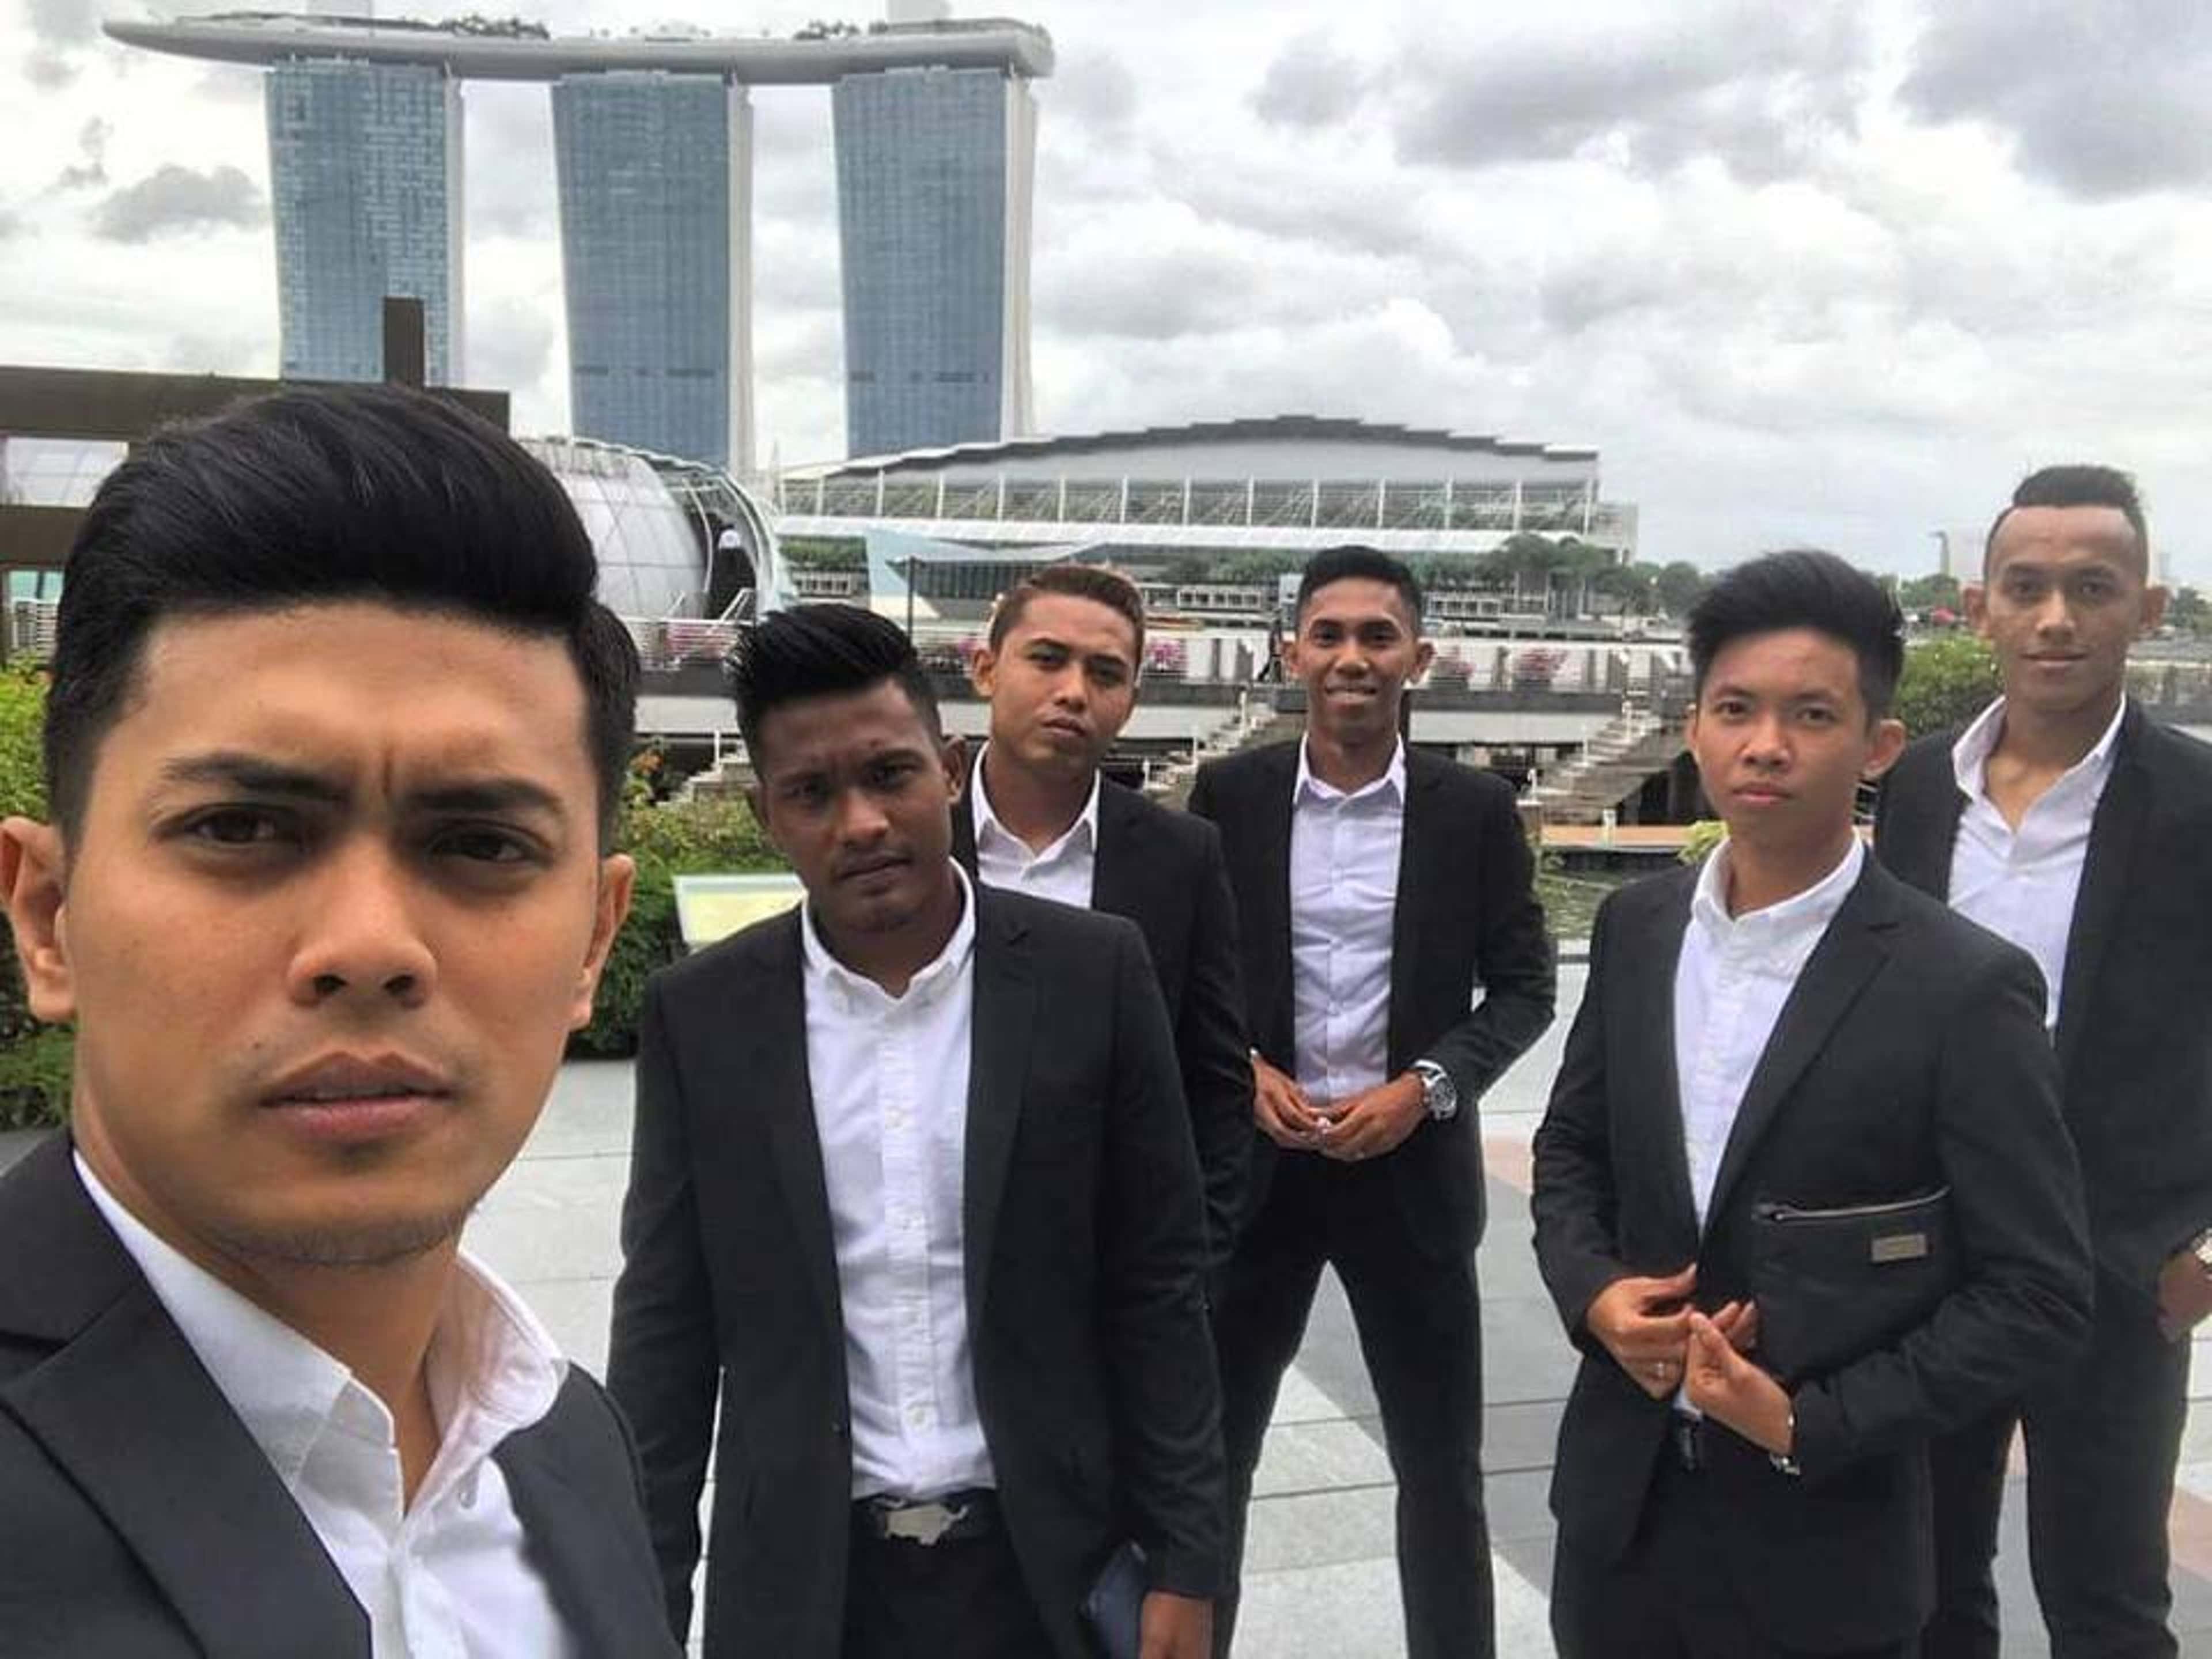 Hougang United players in suits